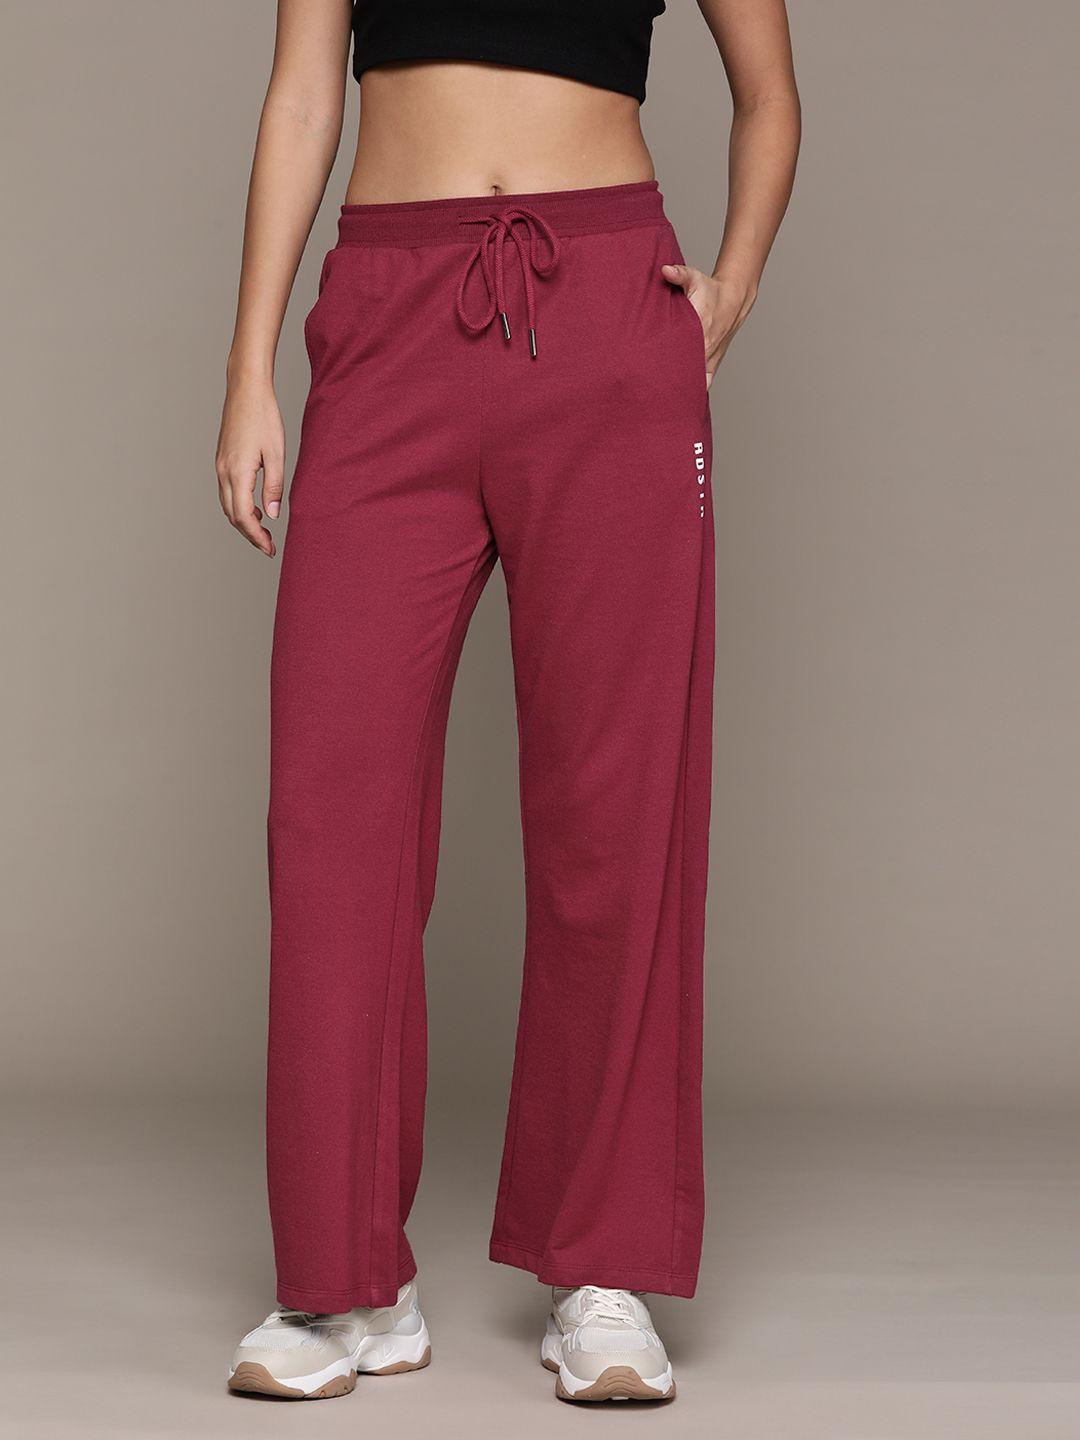 Roadster Solid Track Pants